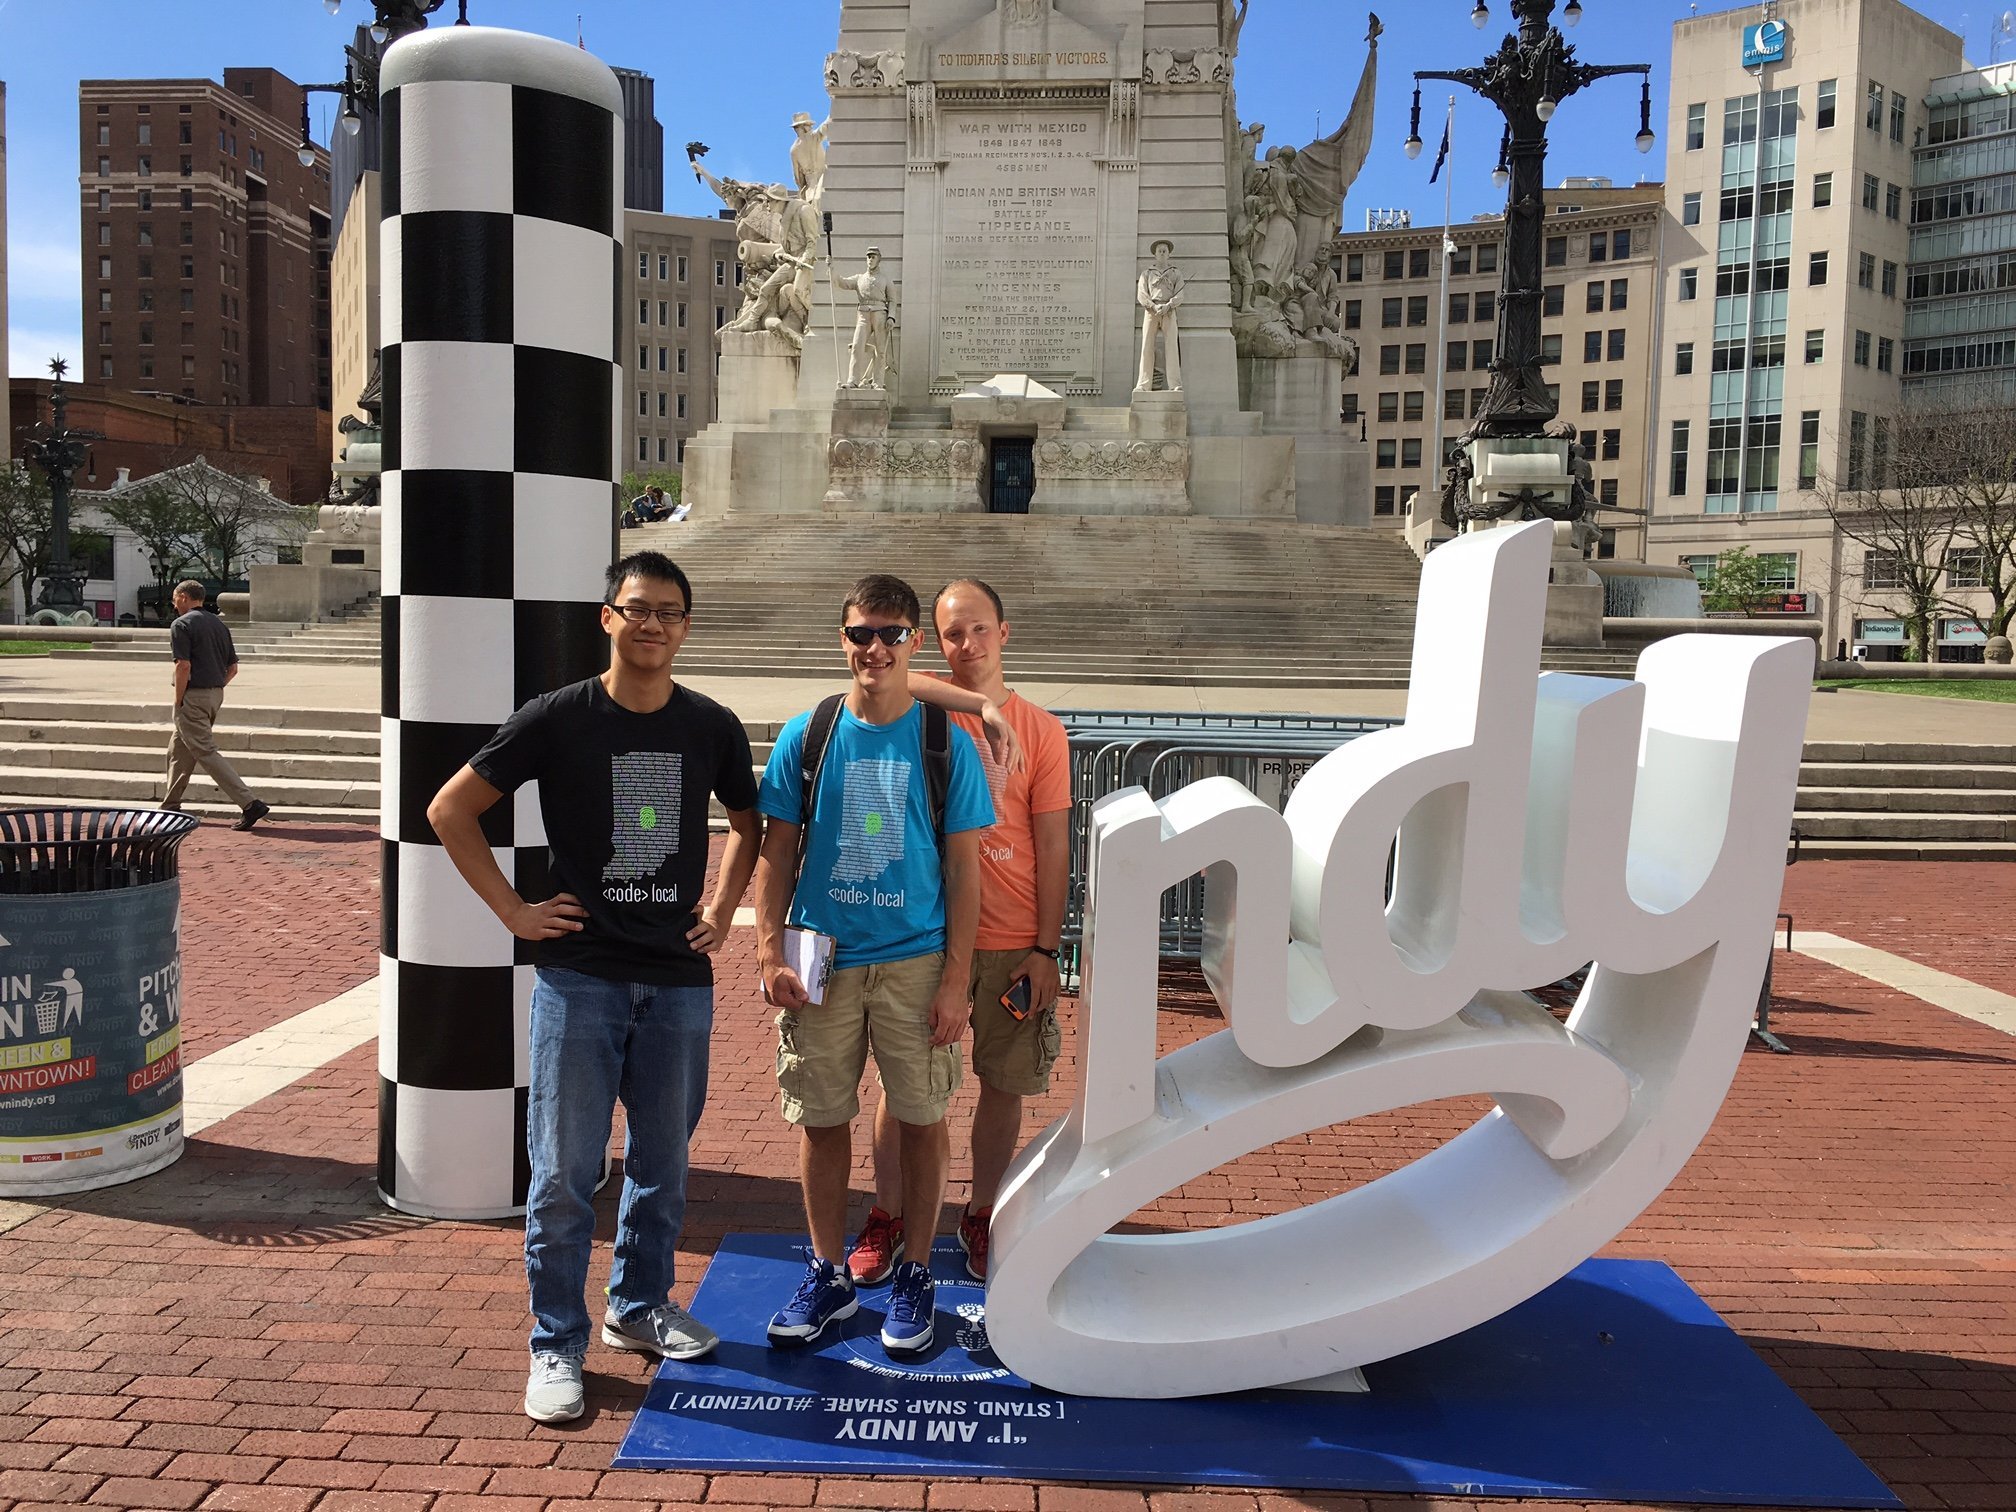 Dylan’s team participates in a downtown Indianapolis scavenger hunt.